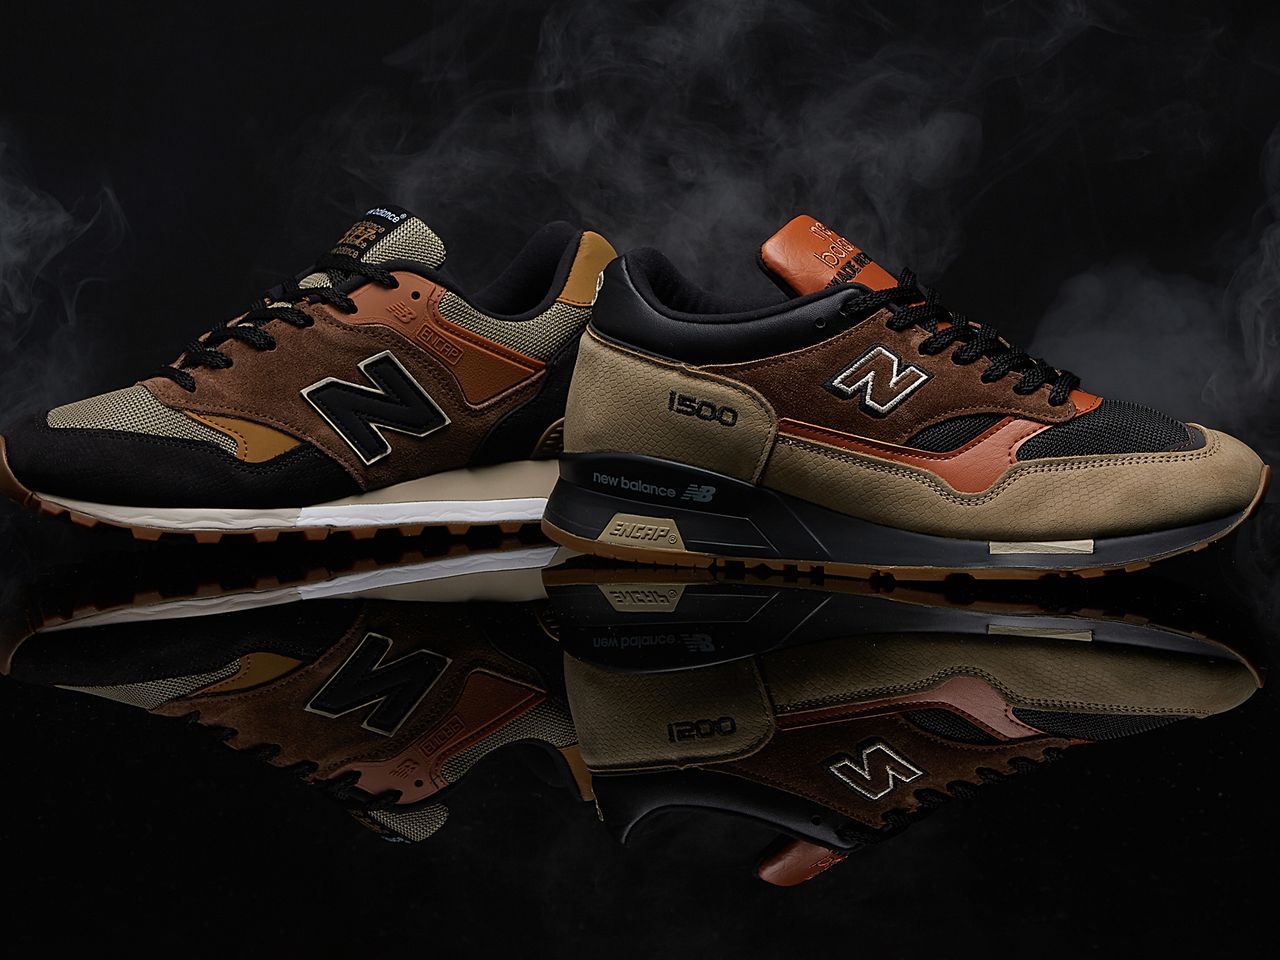 Desanimarse Amperio Presentar New Balance Get in the Halloween Spirit with Spooky 1500 and 577 Styles -  Sneaker Freaker